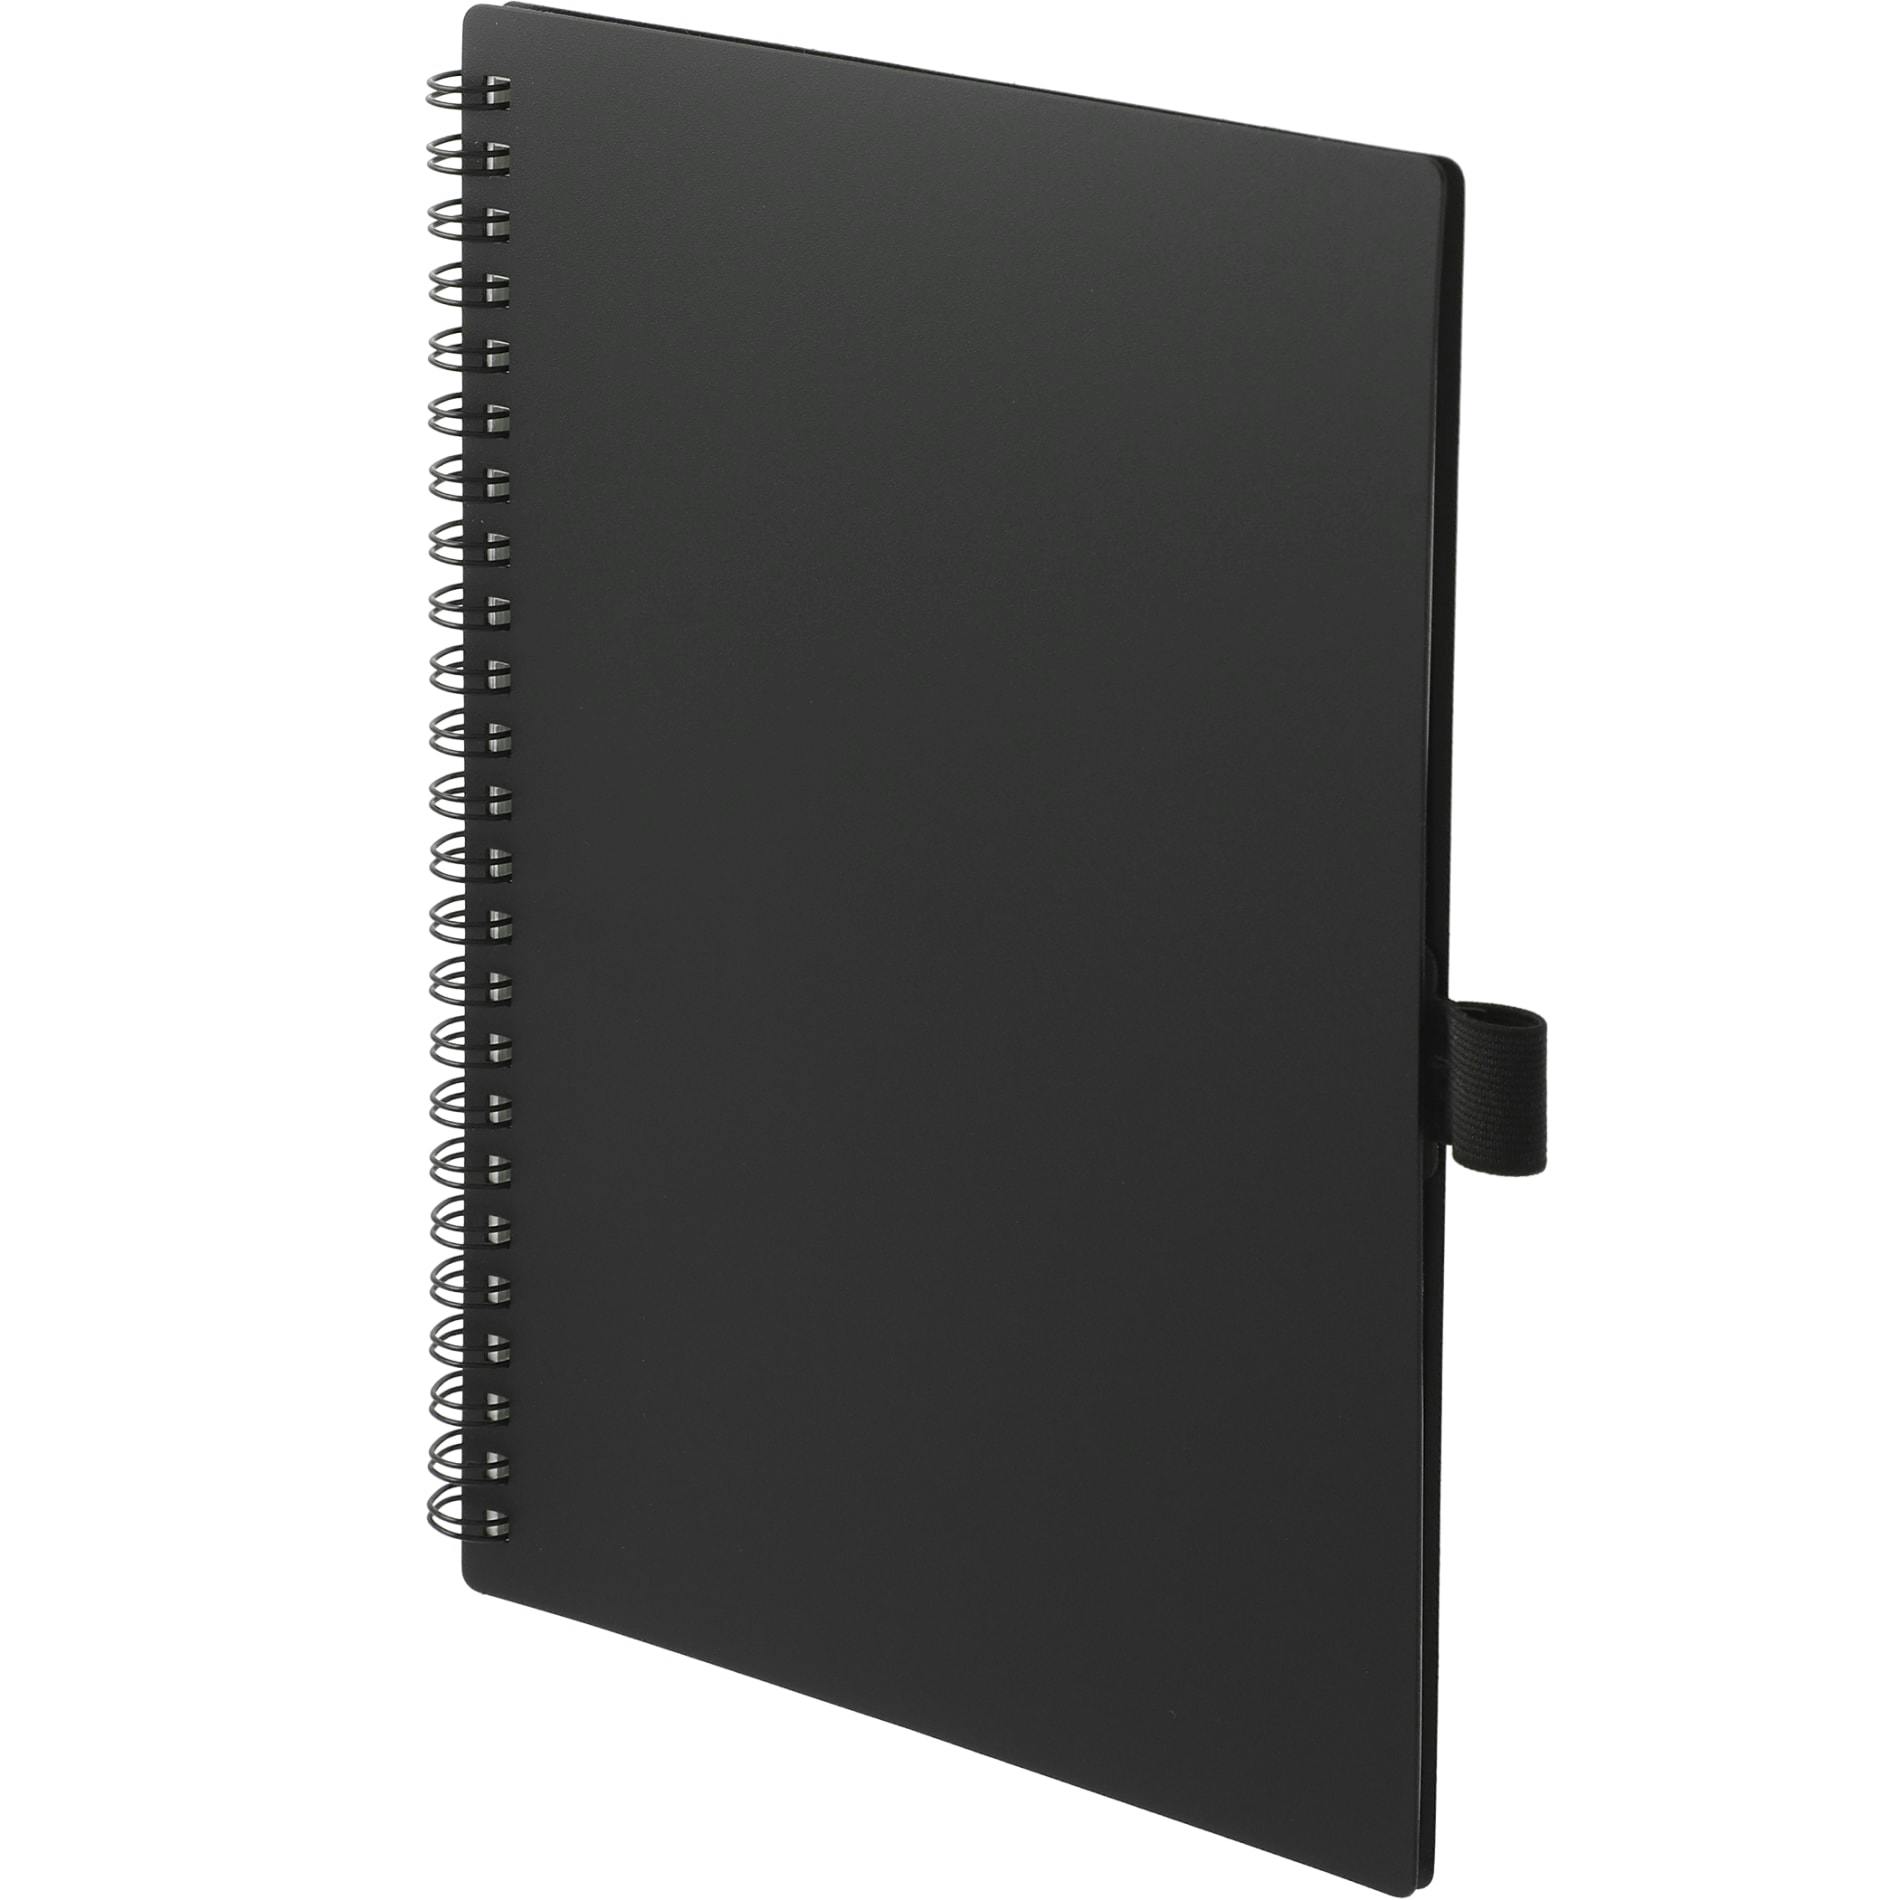 5.7" x 8.5" FUNCTION Erasable Notebook - additional Image 4